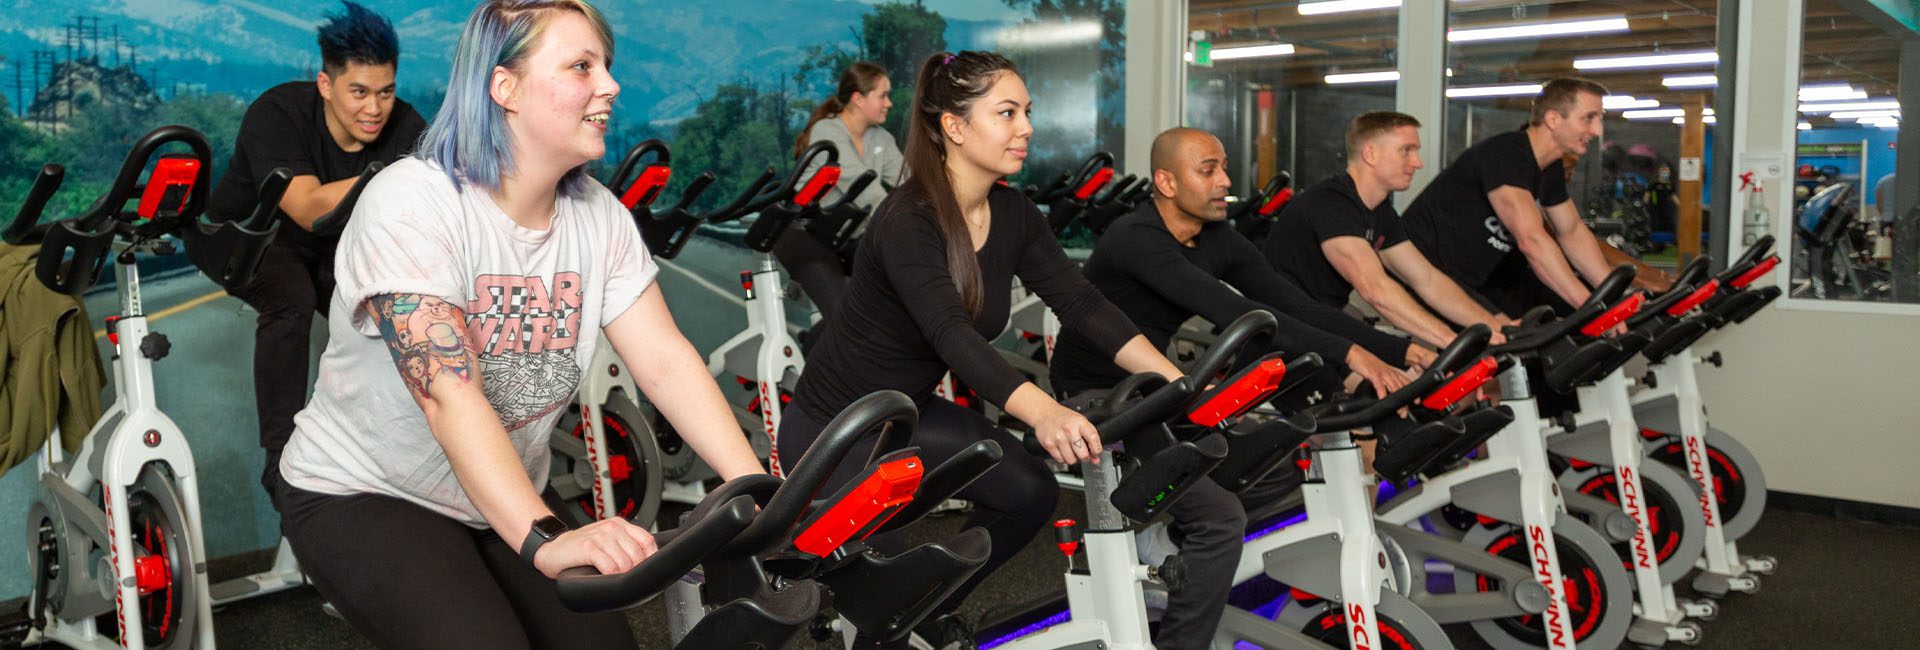 Indoor Cycling Studio  Spinning Classes in Portland Gym